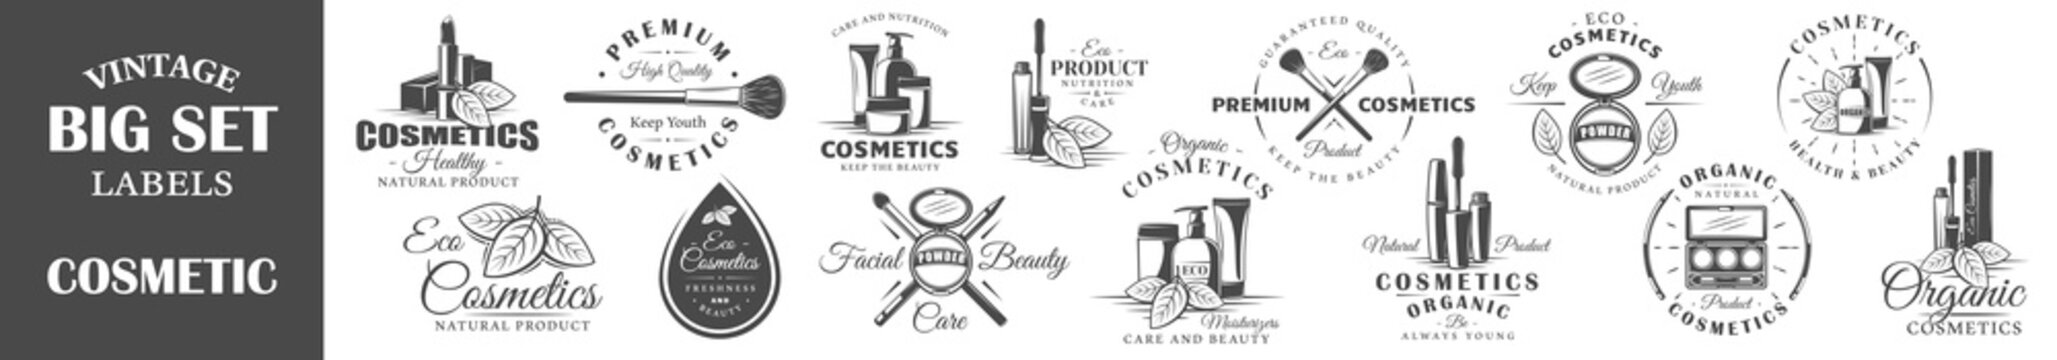 Set of vintage cosmetics labels, logos. Design elements for graphic and web design, natural products. Collection symbols: cream, bottle, packaging. Vector illustration